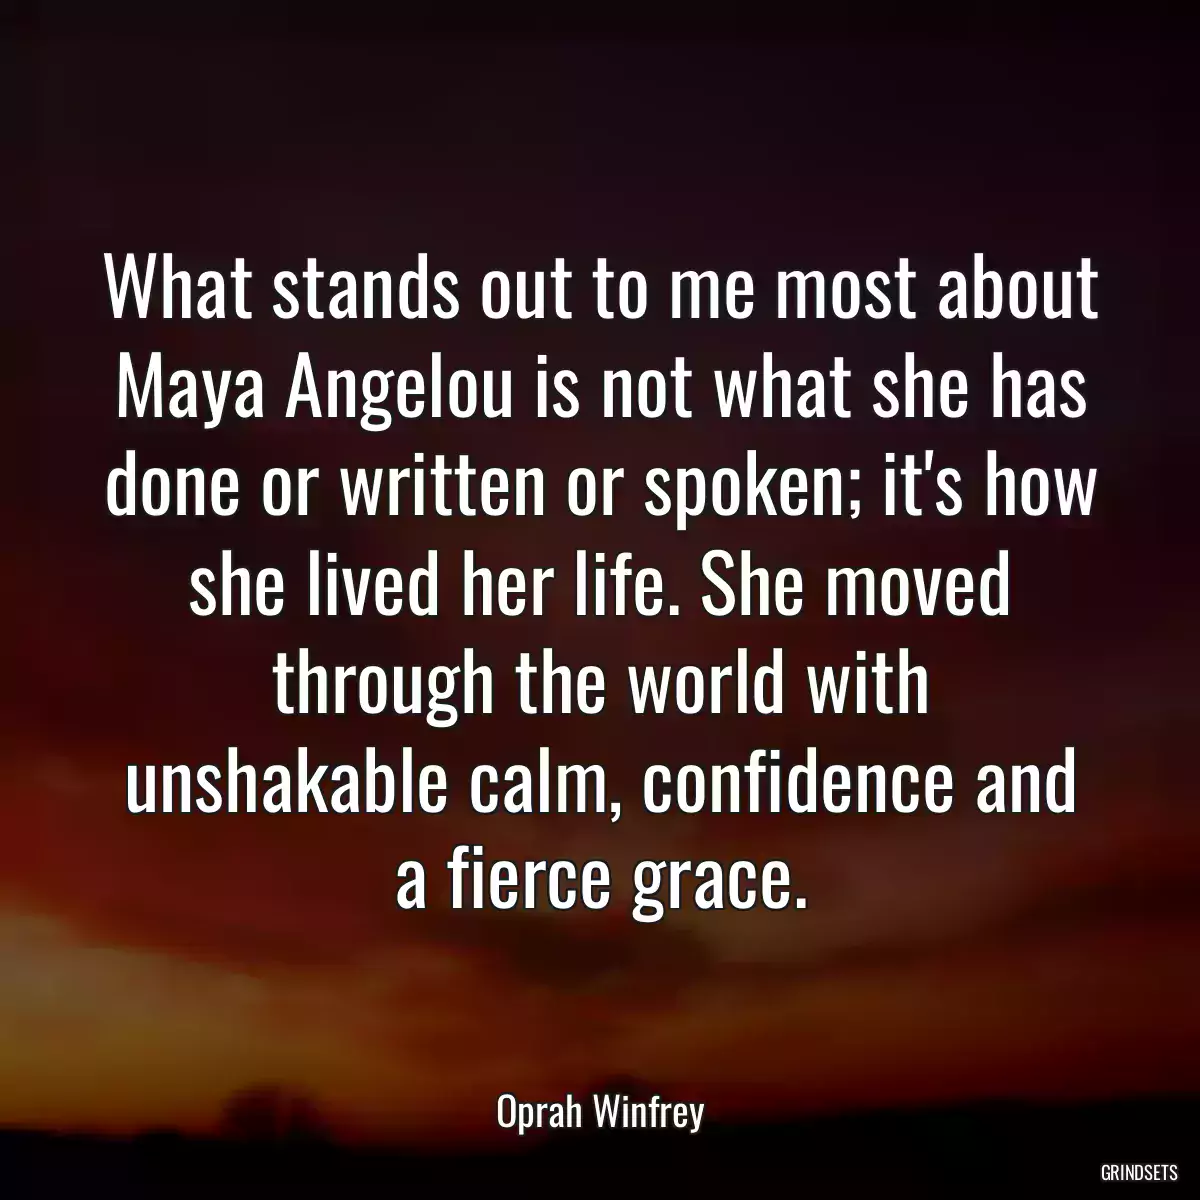 What stands out to me most about Maya Angelou is not what she has done or written or spoken; it\'s how she lived her life. She moved through the world with unshakable calm, confidence and a fierce grace.